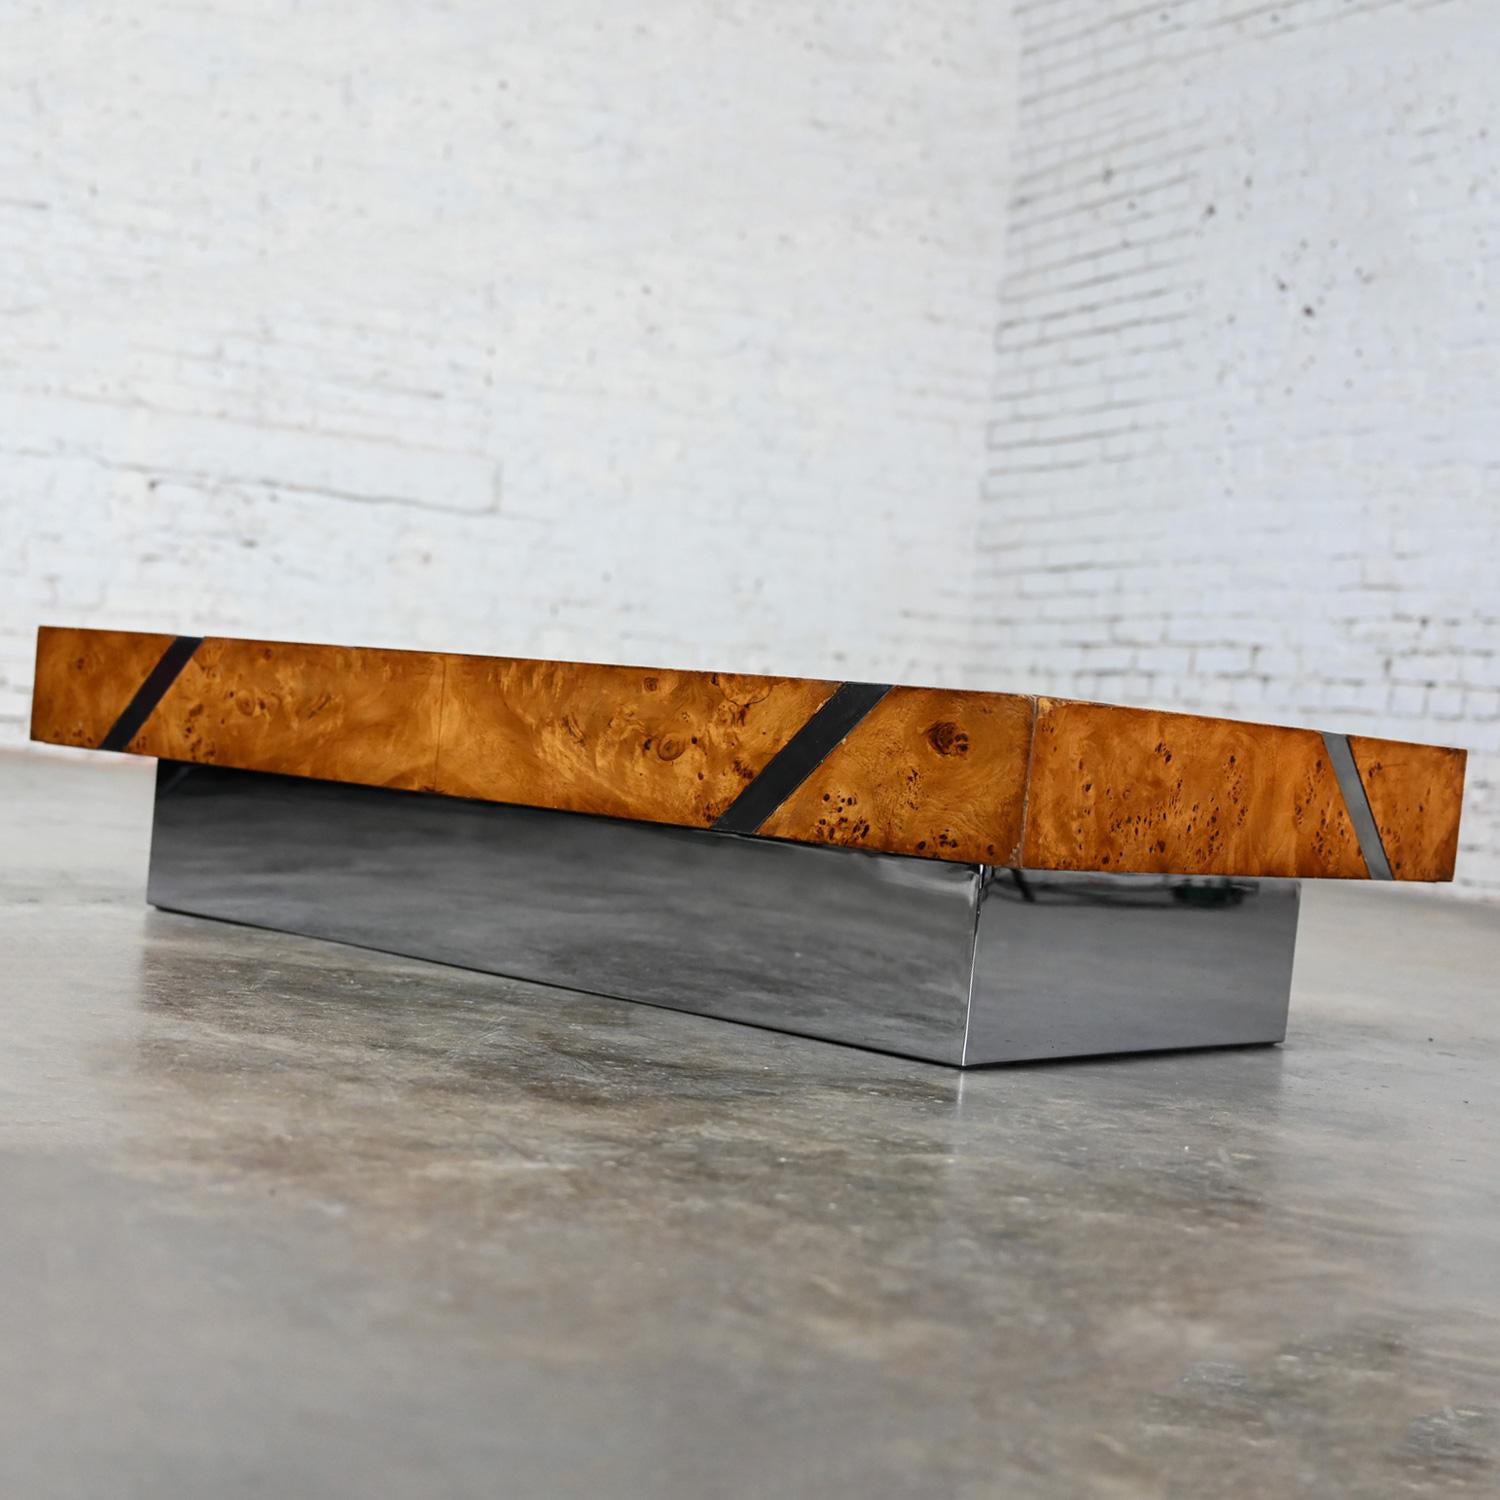 20th Century Modern Burl Chrome & Polished Stainless Steel Floating Coffee Table Plinth Base For Sale